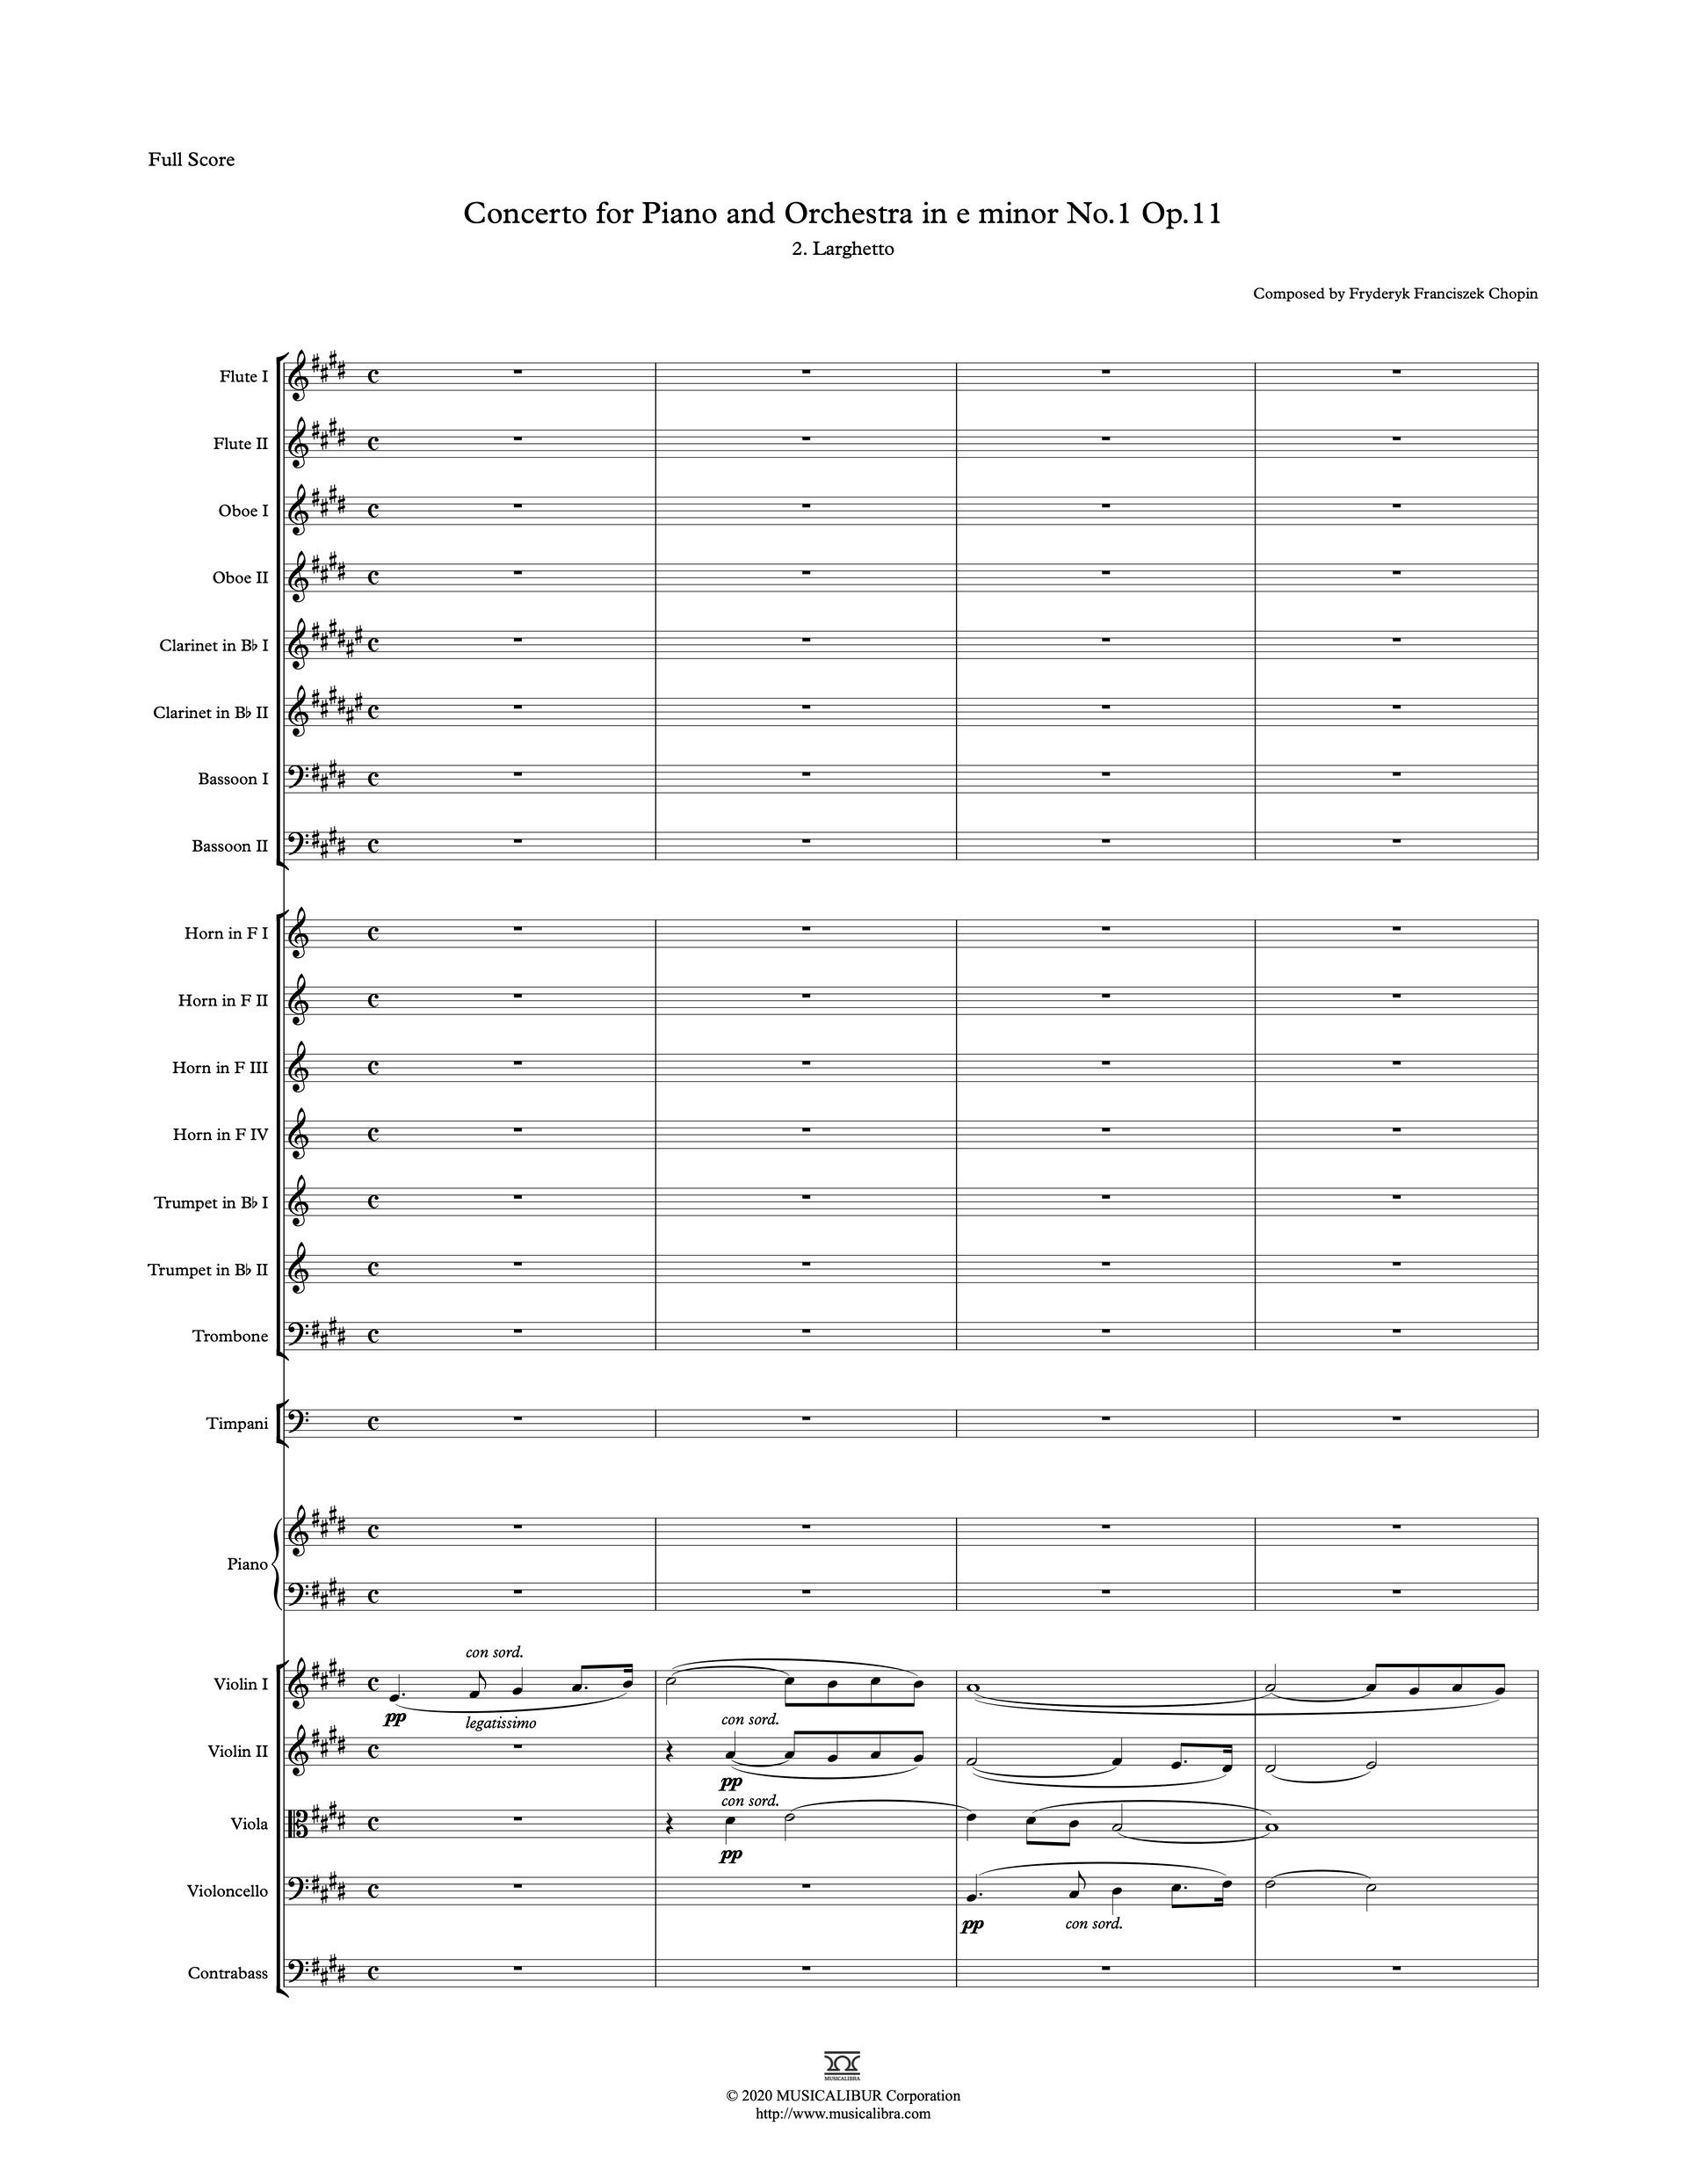 Newly notated orchestra score of Chopin's Concerto for Piano and Orchestra in e minor Op. 11, No. 1, 2nd Movement, Larghetto preview page 1